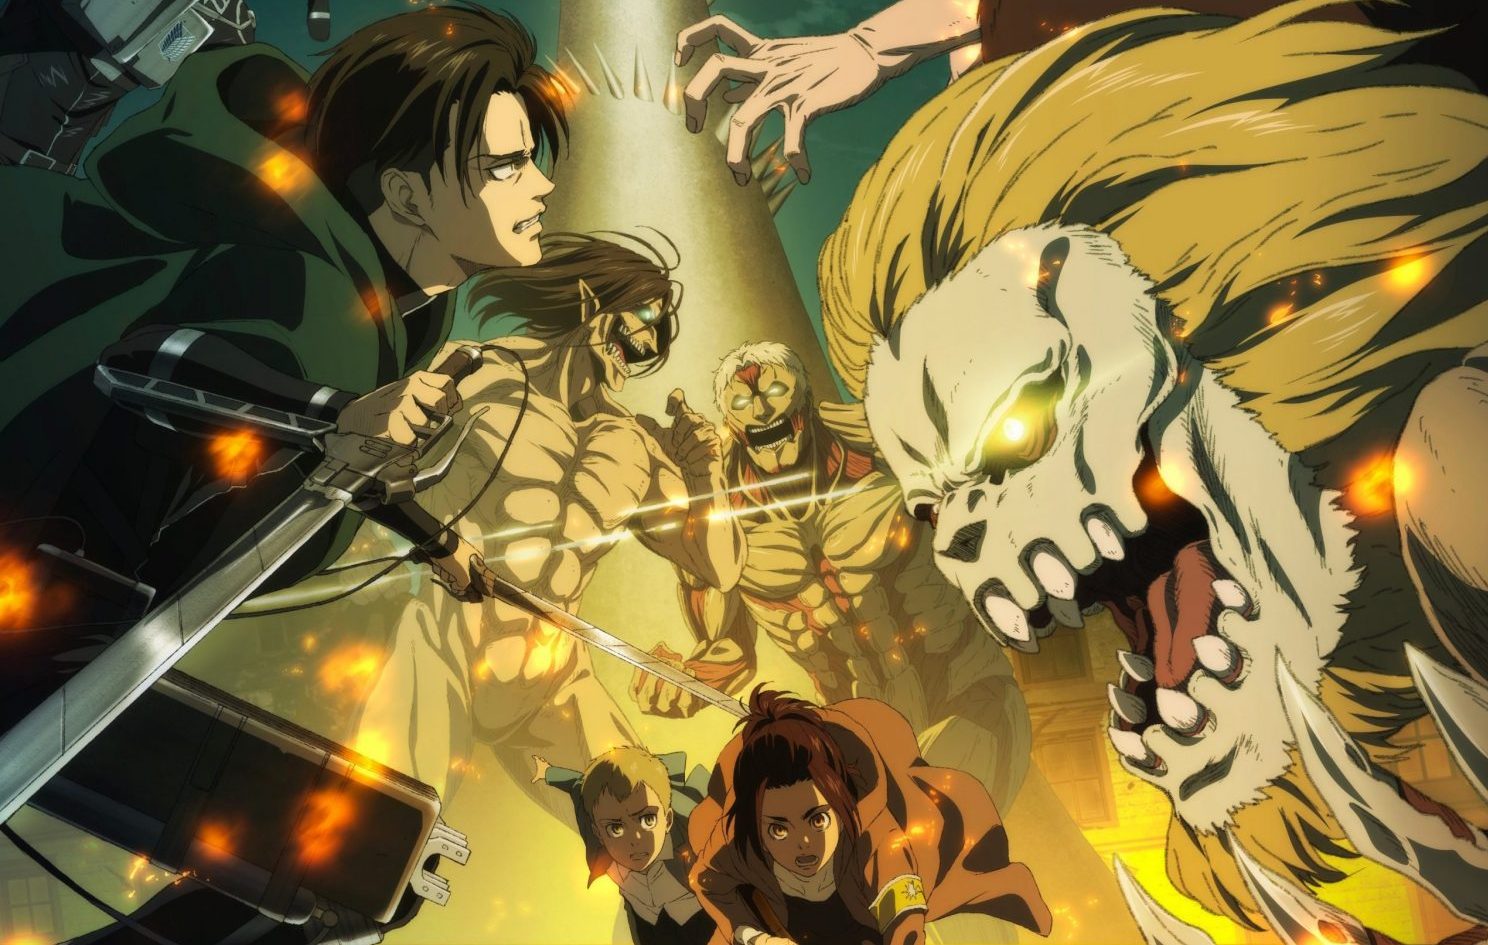 Where To Start Attack On Titan Manga After Anime?